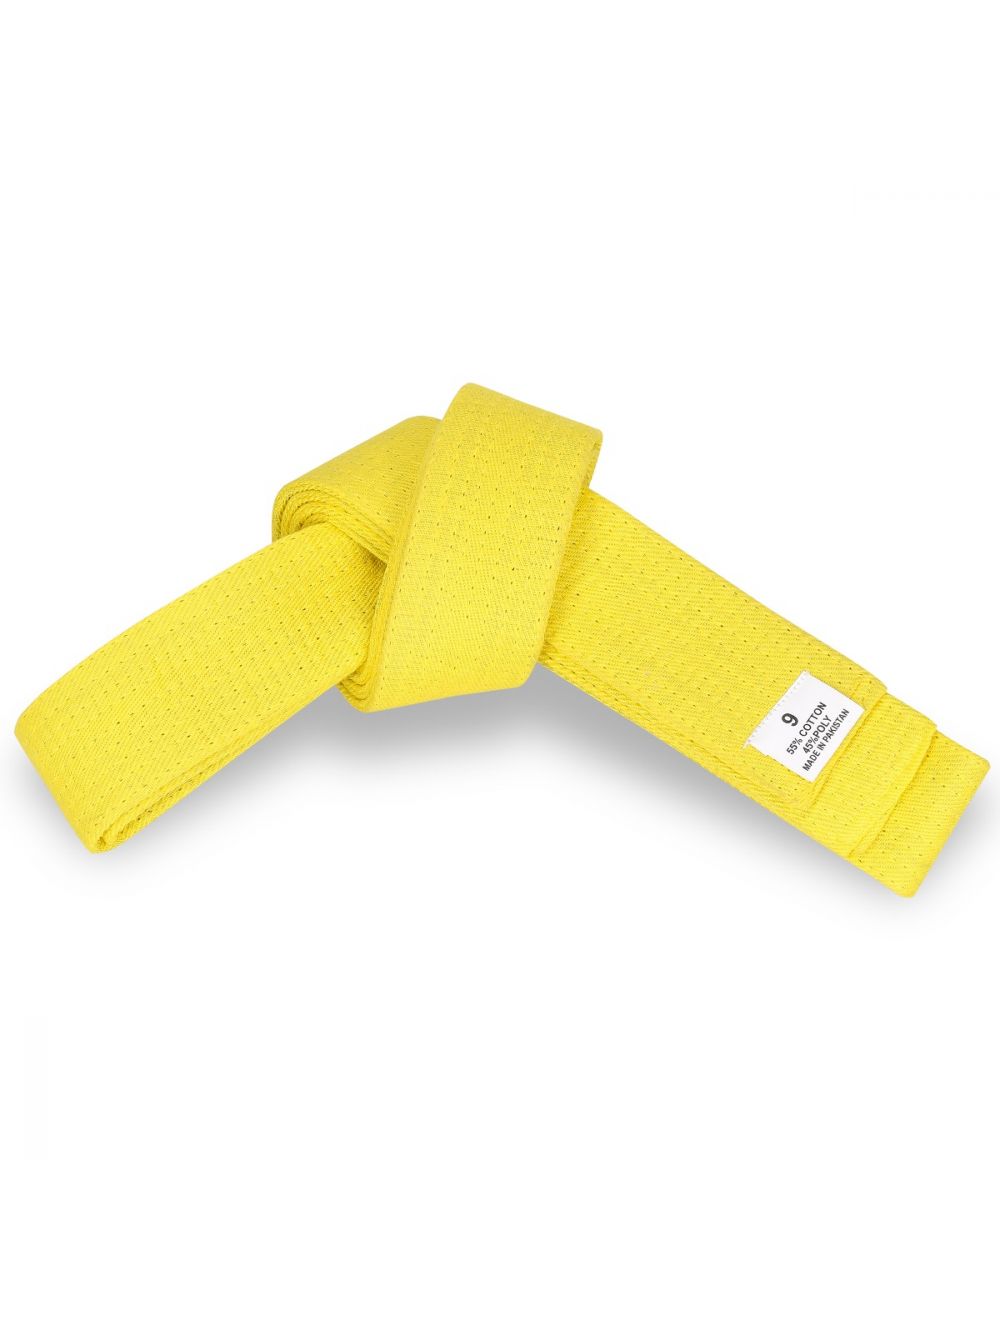 Solid Karate Belts with 9 Rows of Stitching, Ideal for Traditional Karate, MMA, Judo, Taekwondo